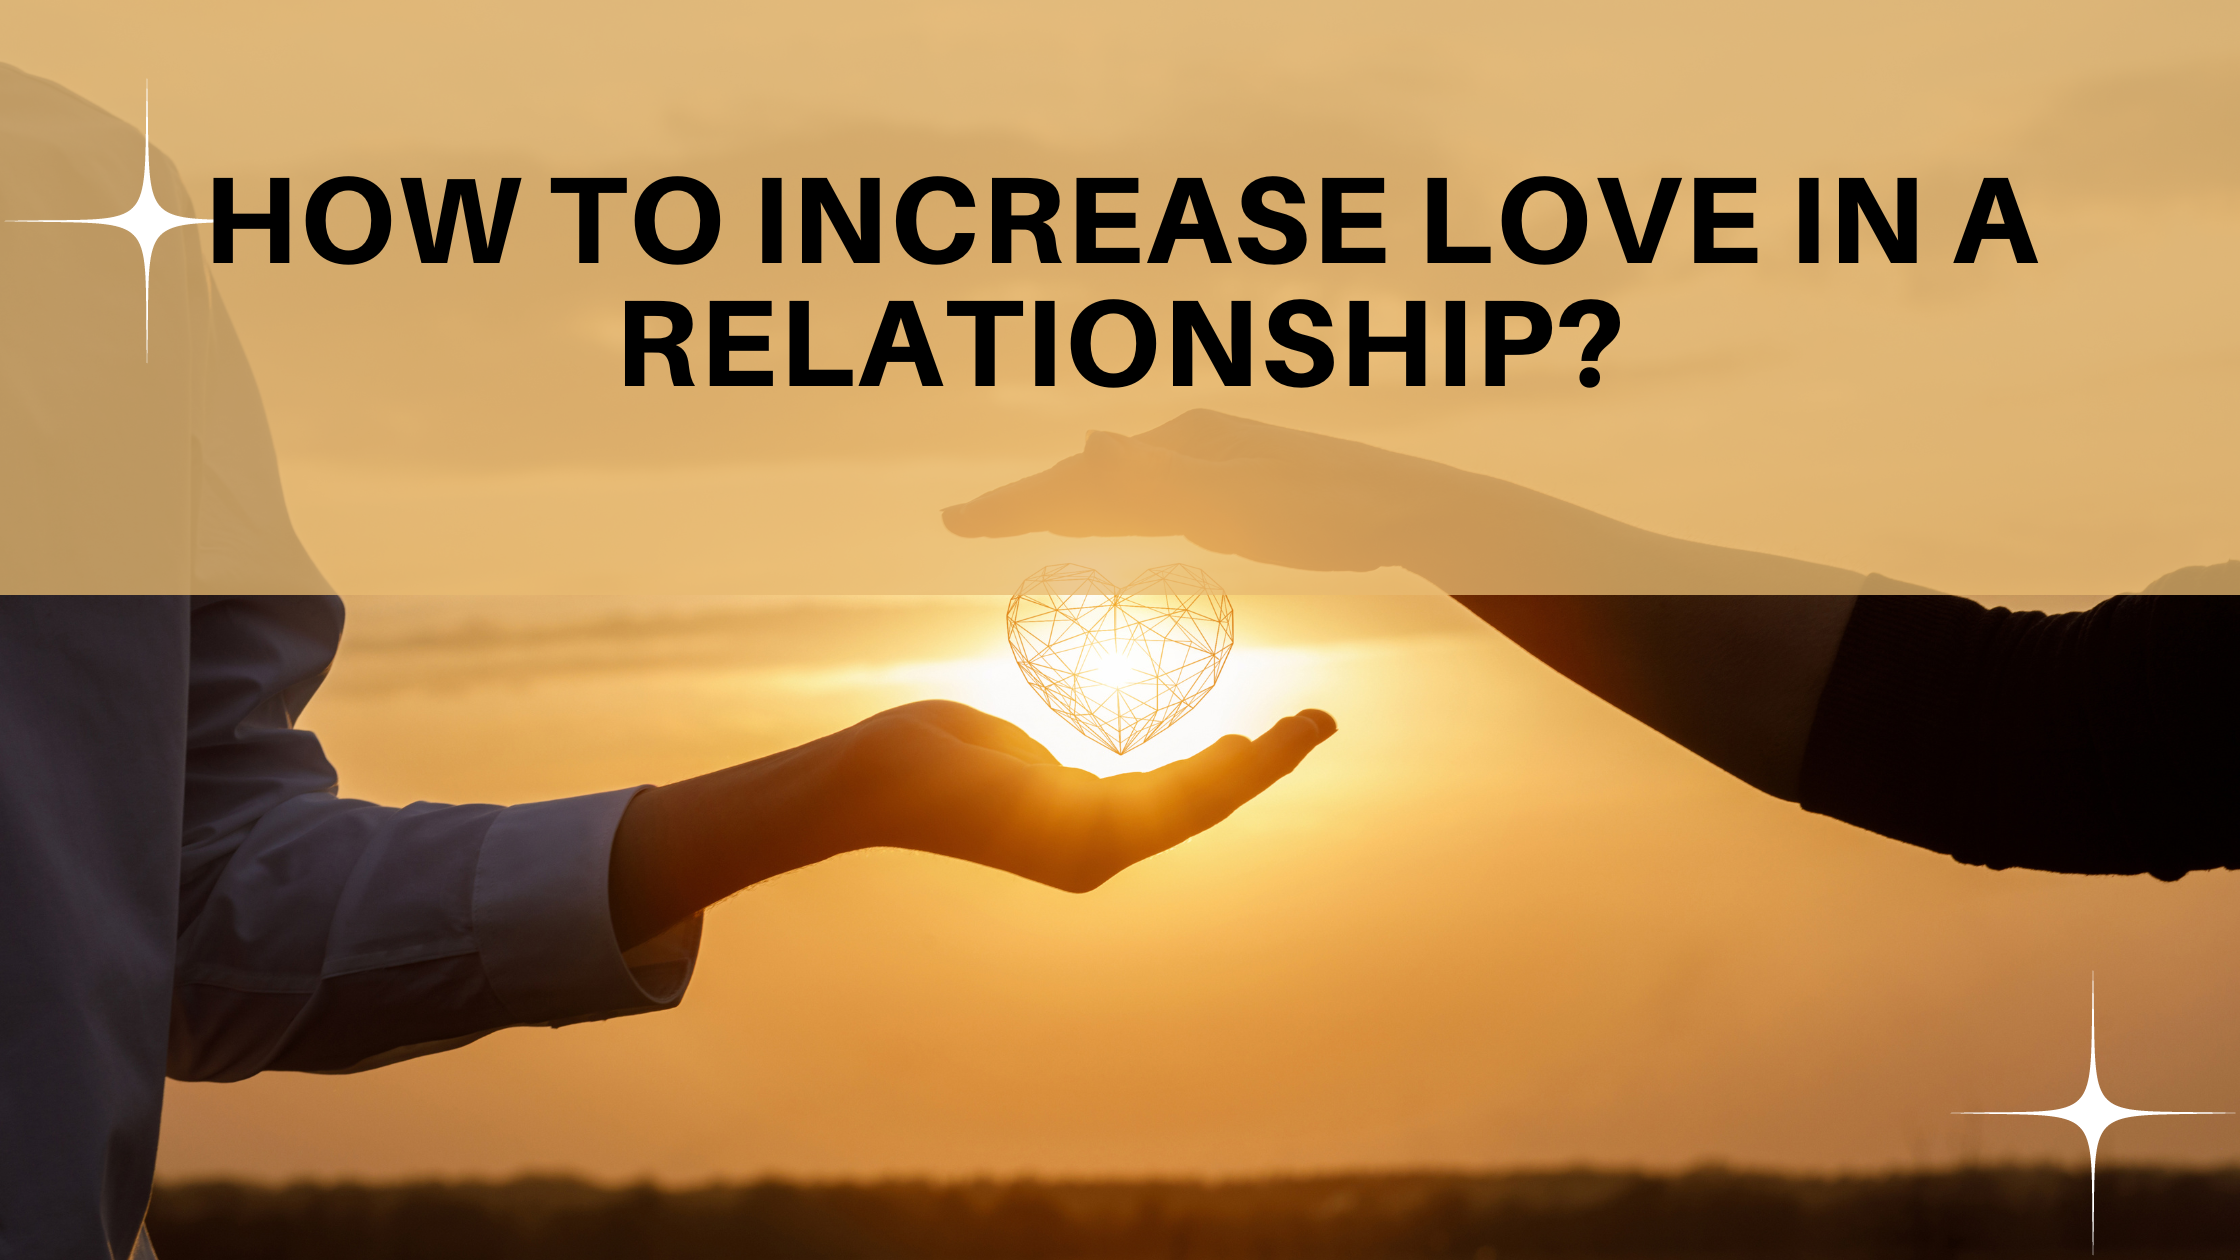 How to Increase Love in a Relationship